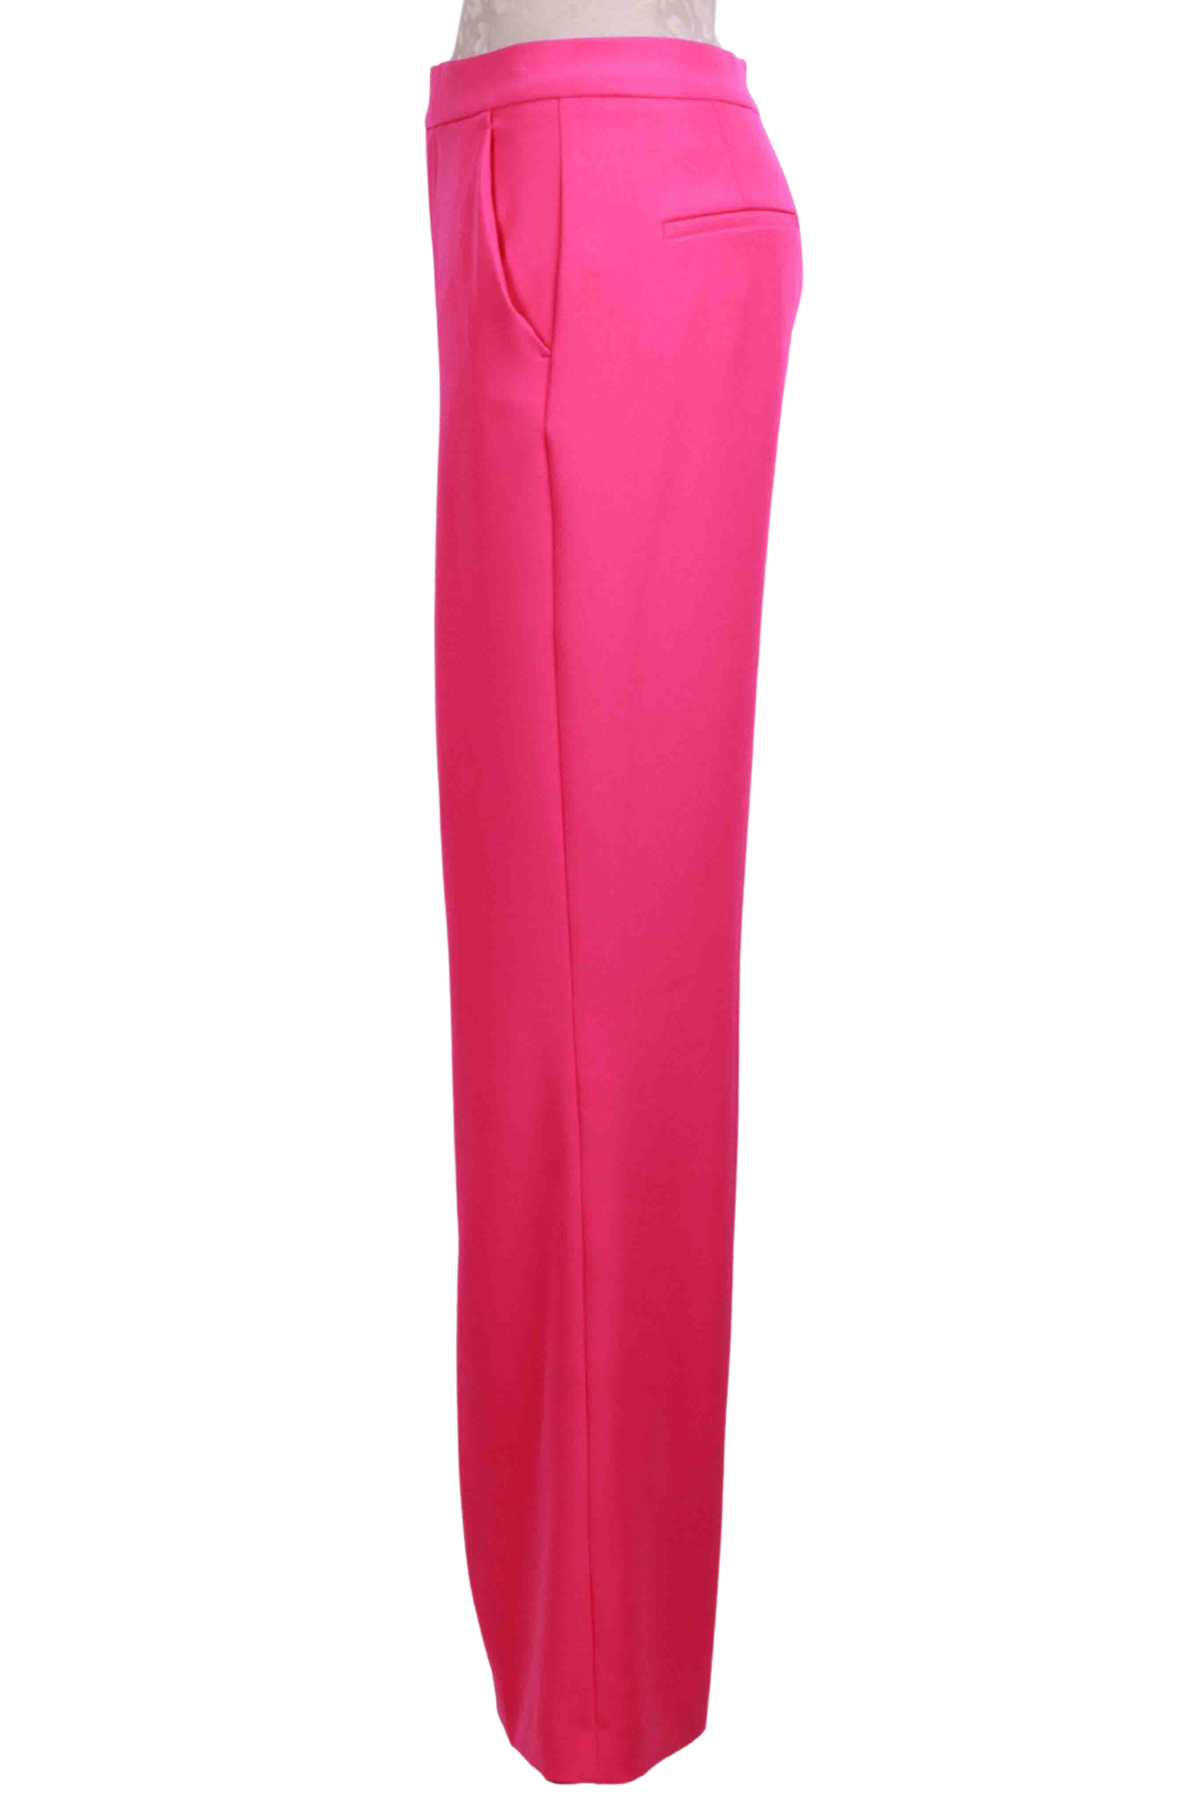 side view of Magenta colored Ashton Crepe Pant by Generation Love